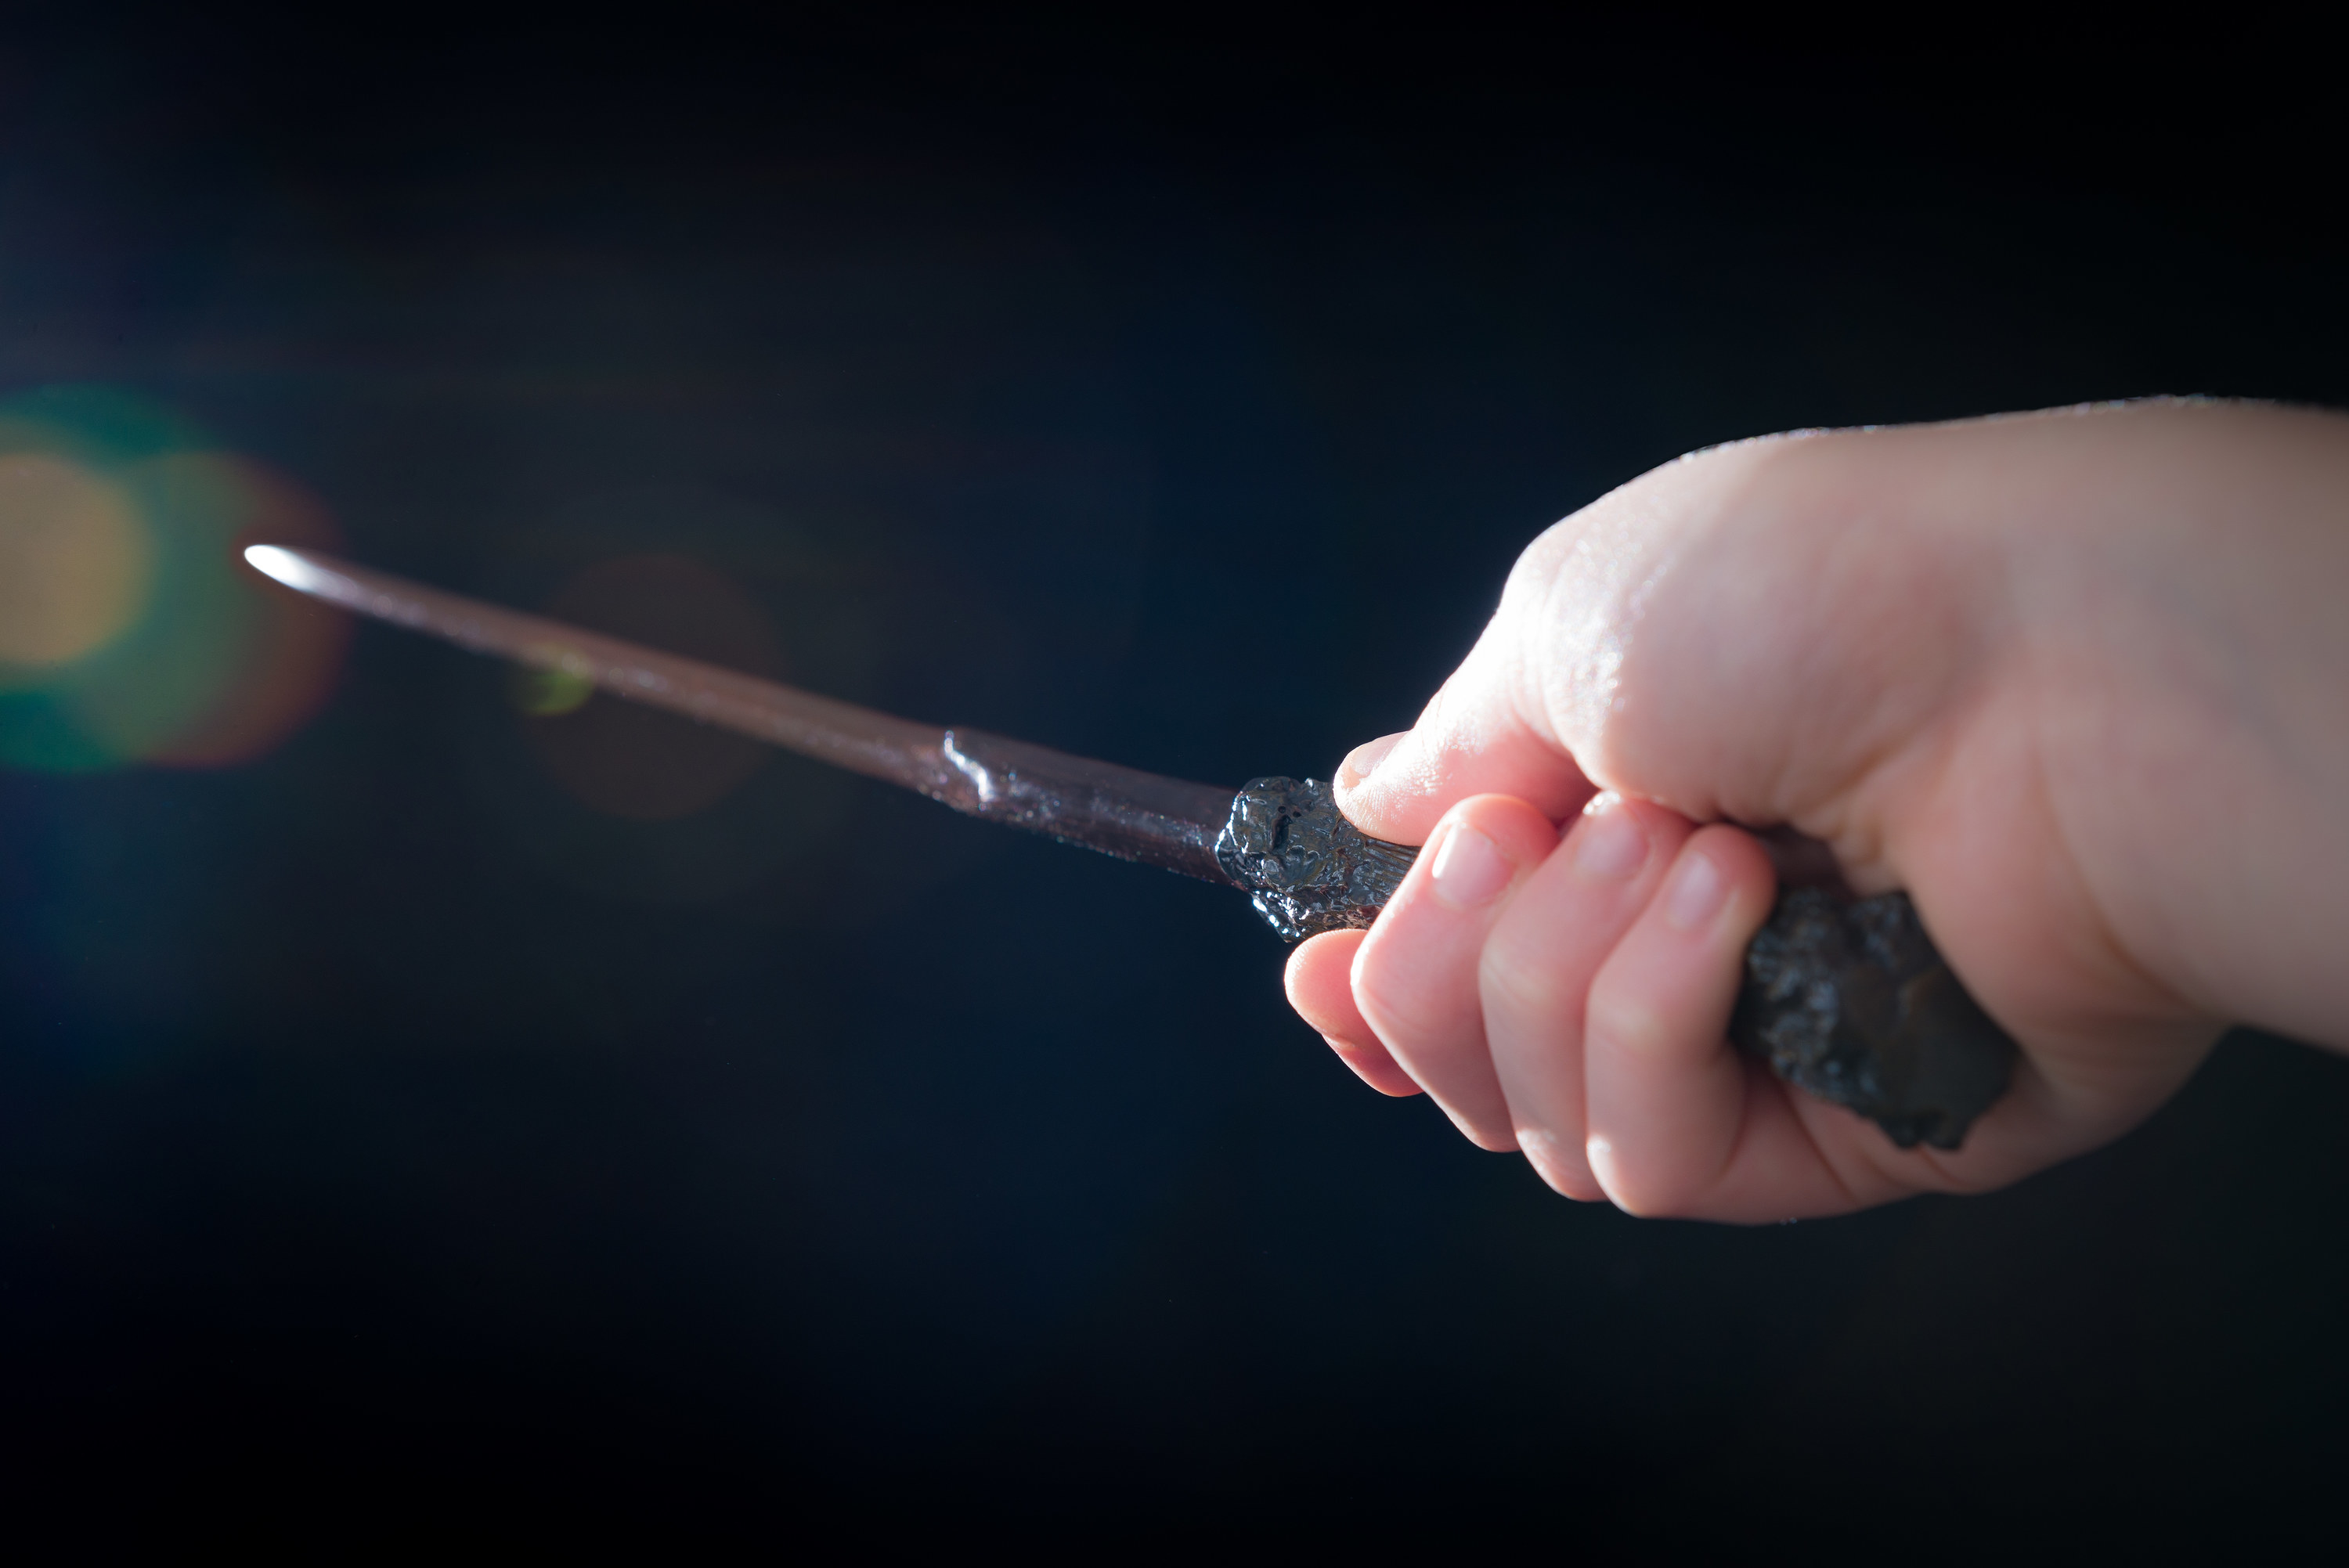 A person holding a wand